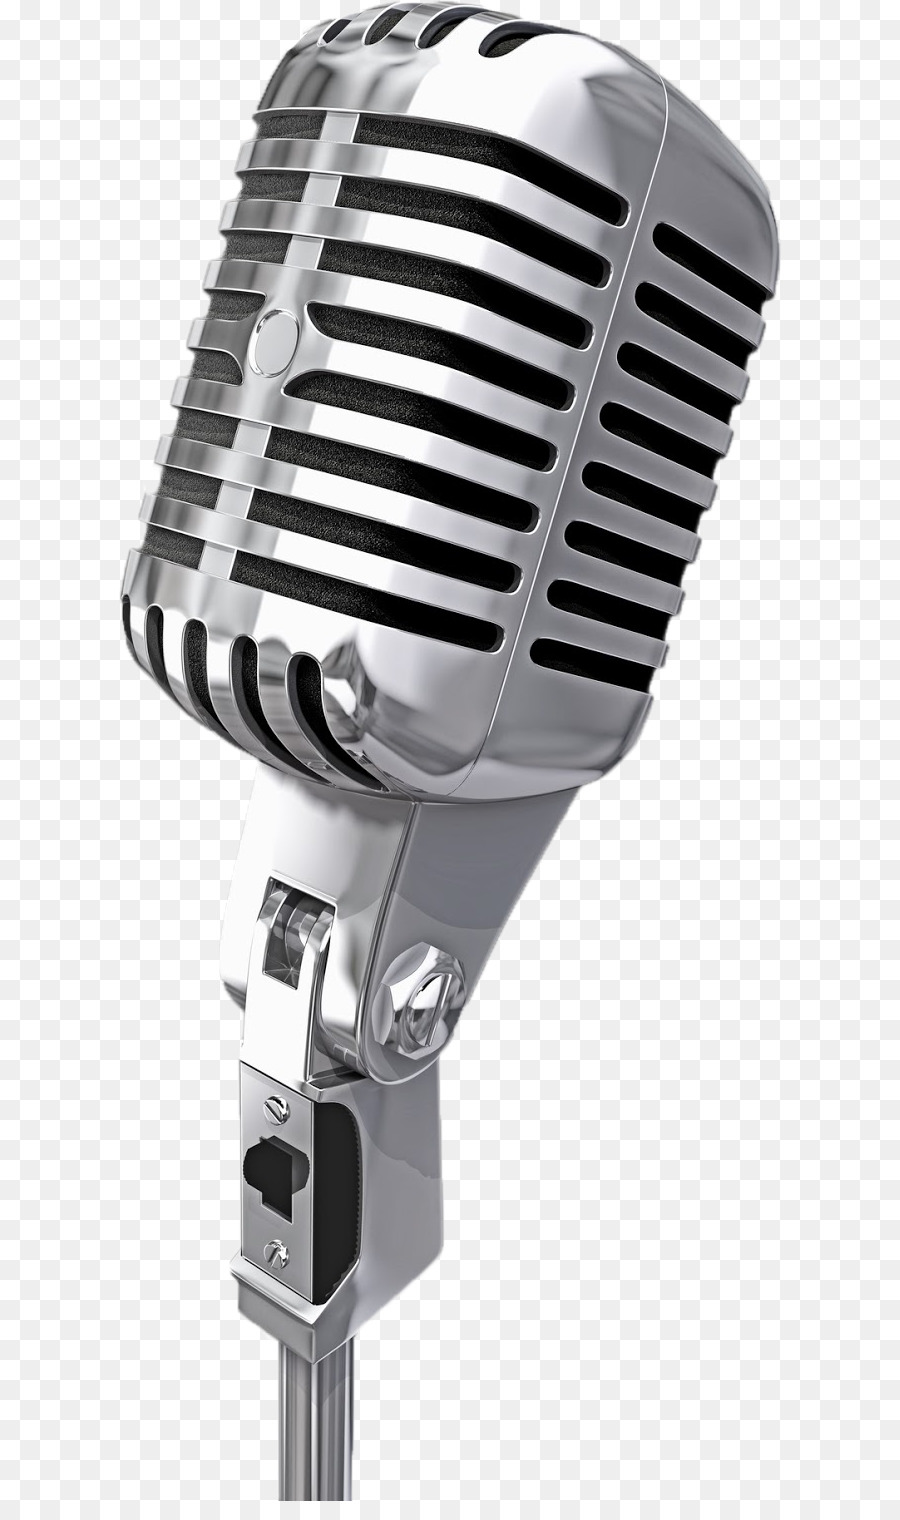 Microphone Clip art - microphone png download - 662*1501 - Free Transparent  png Download.